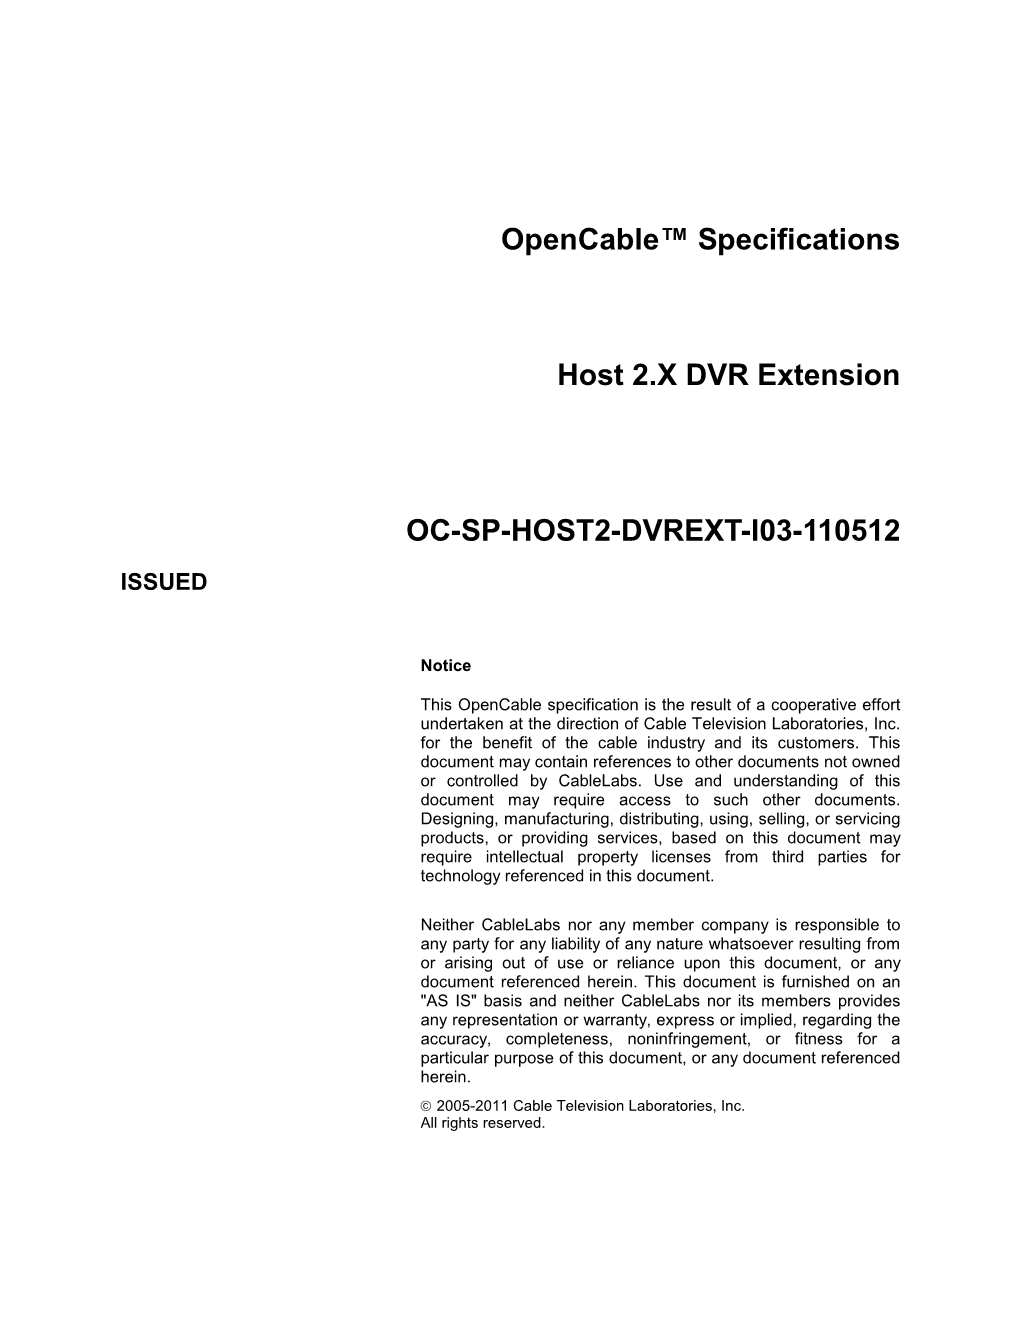 Opencable™ Specifications Host 2.X DVR Extension (OC-SP-HOST2-DVREXT-I03-110512)